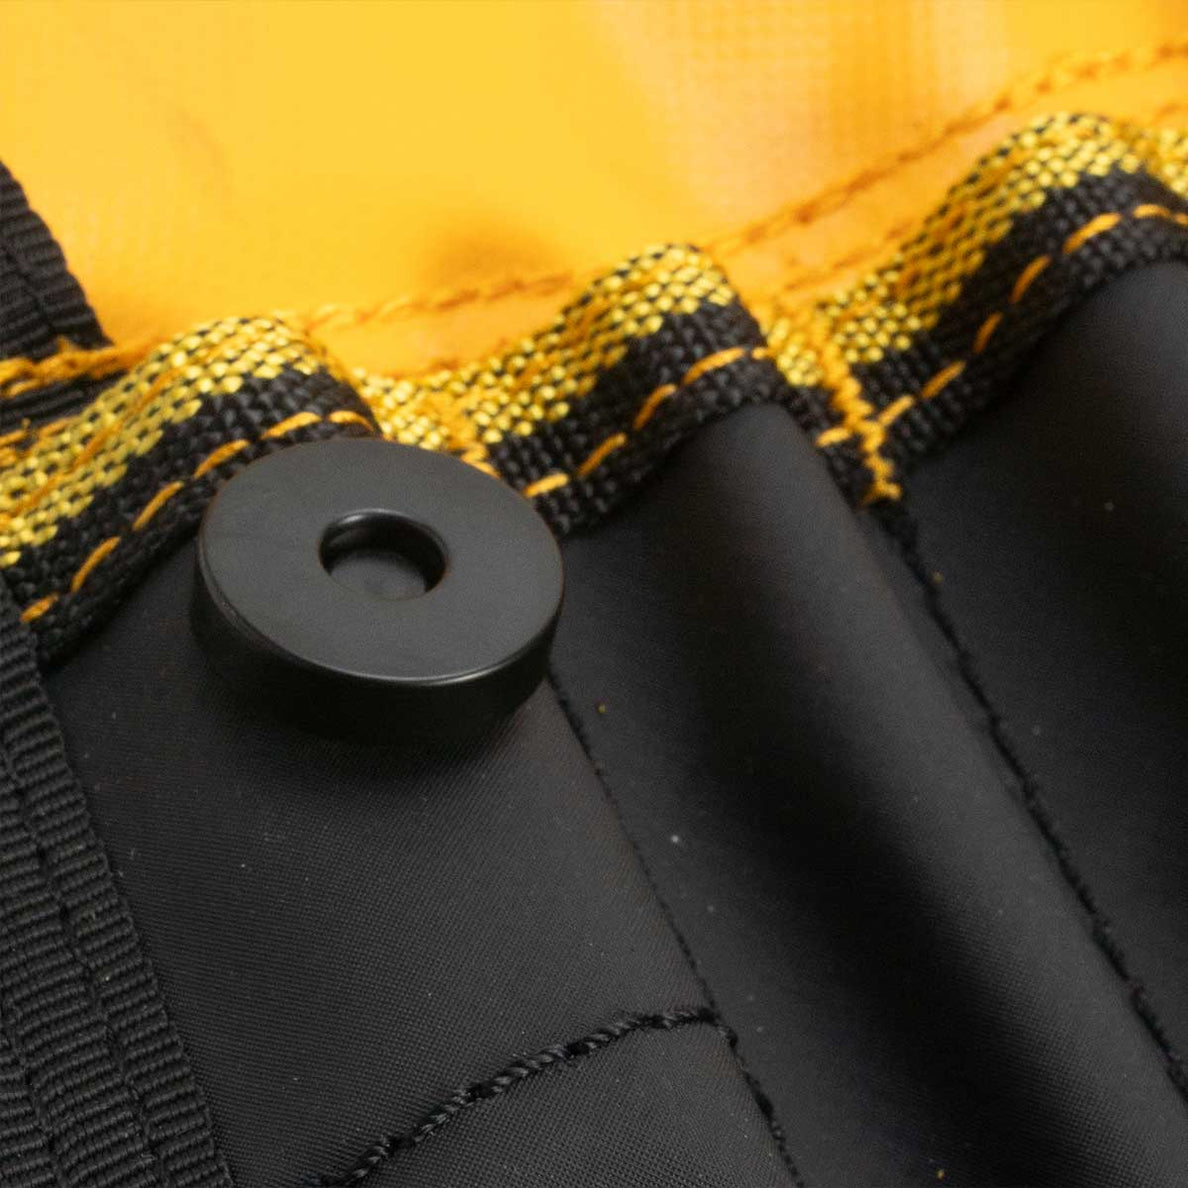 17 Pocket Yellow PVC Spanner Roll RX03B612YE by Rugged Xtremes